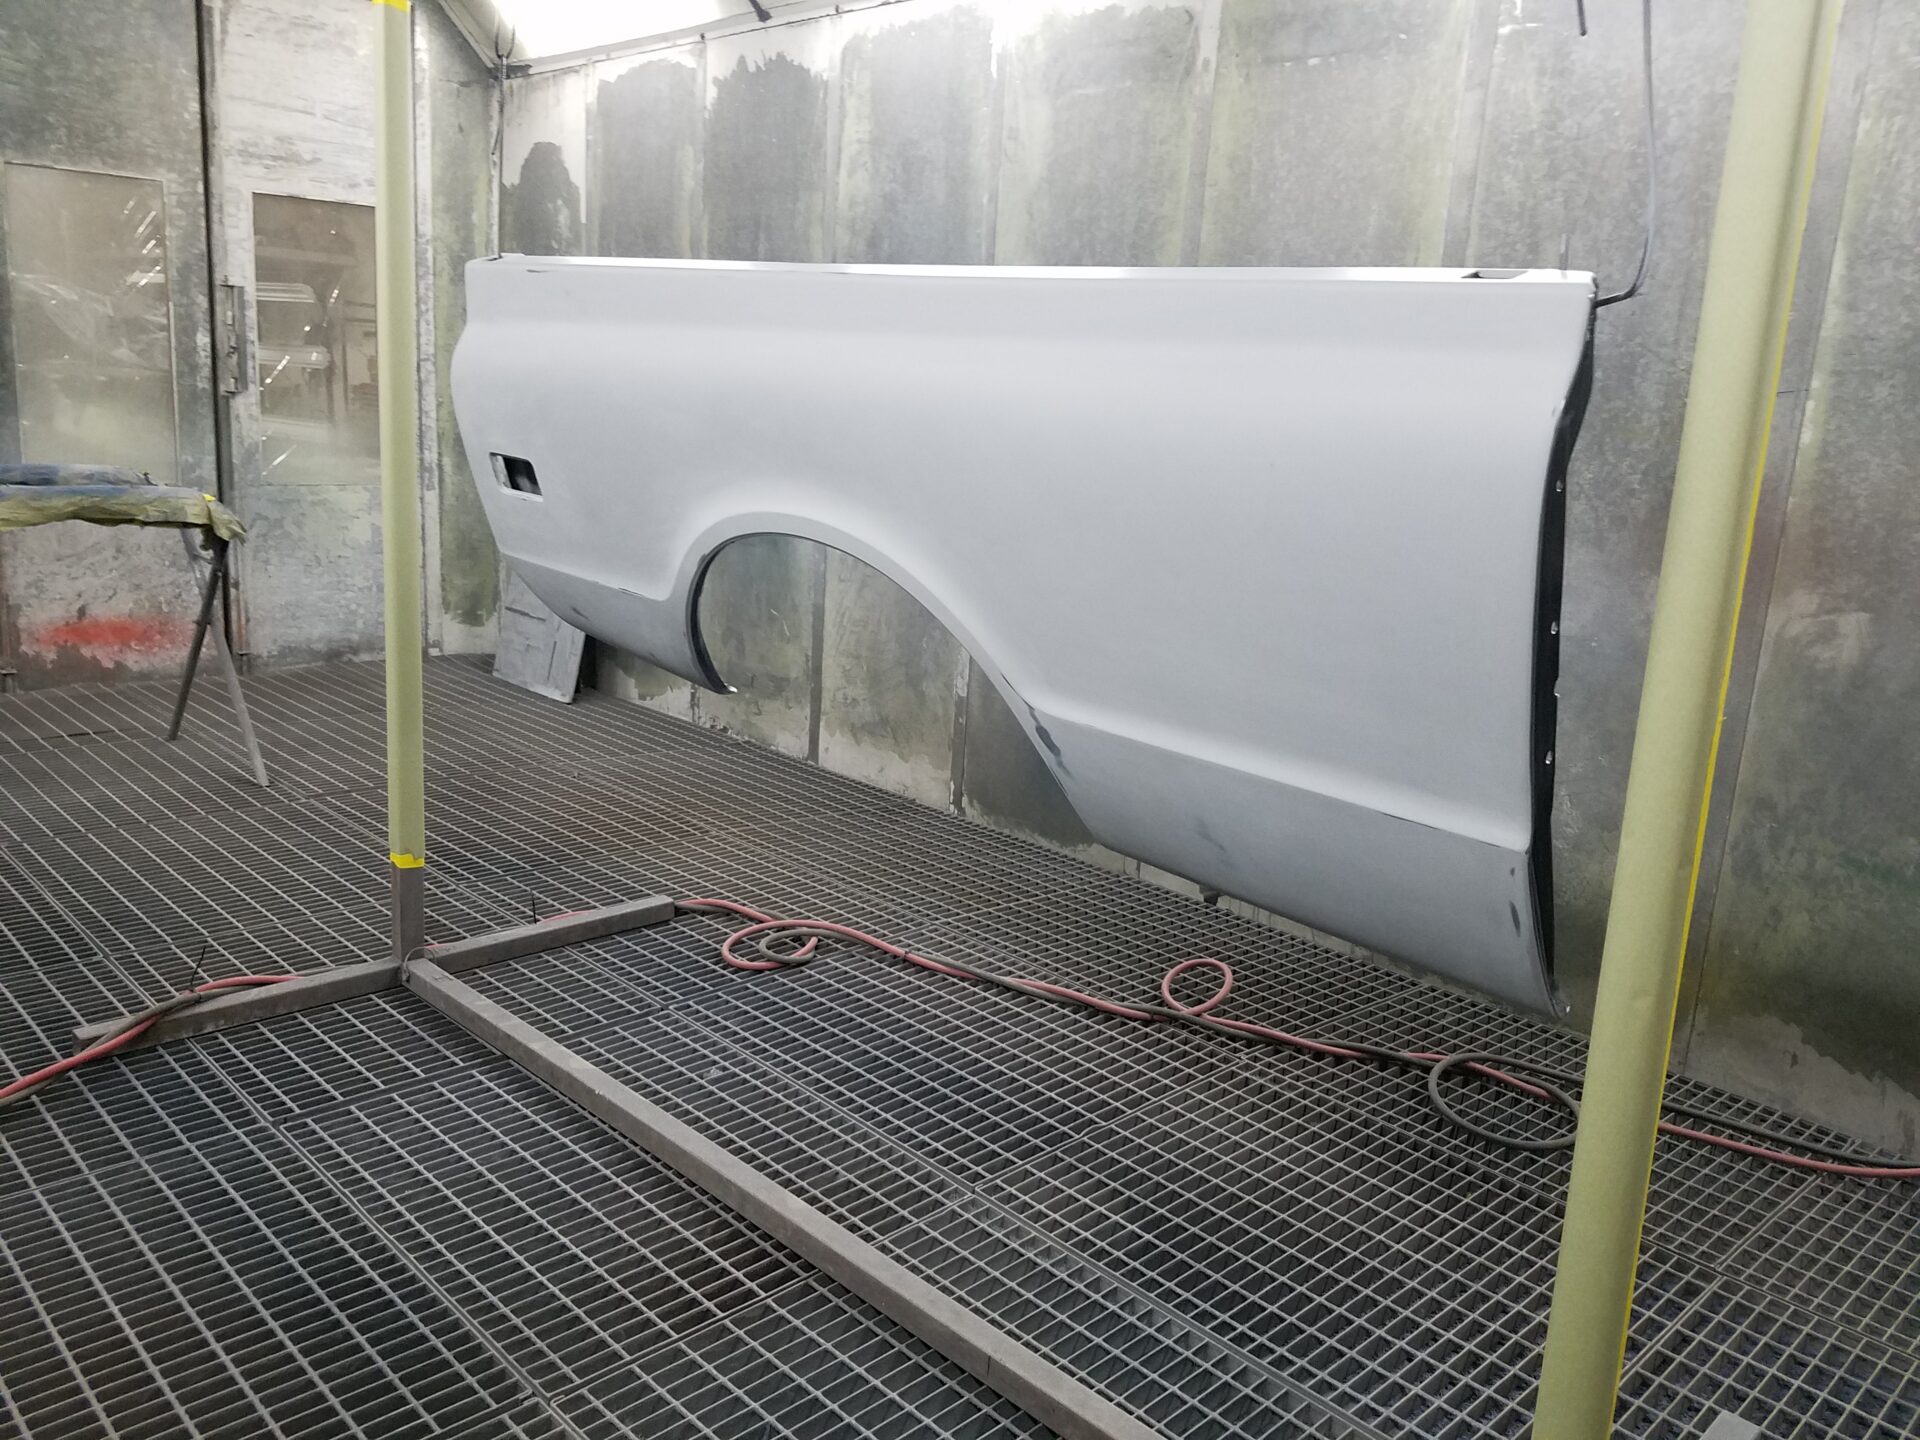 Repainting the 1968 Chevy C10 part